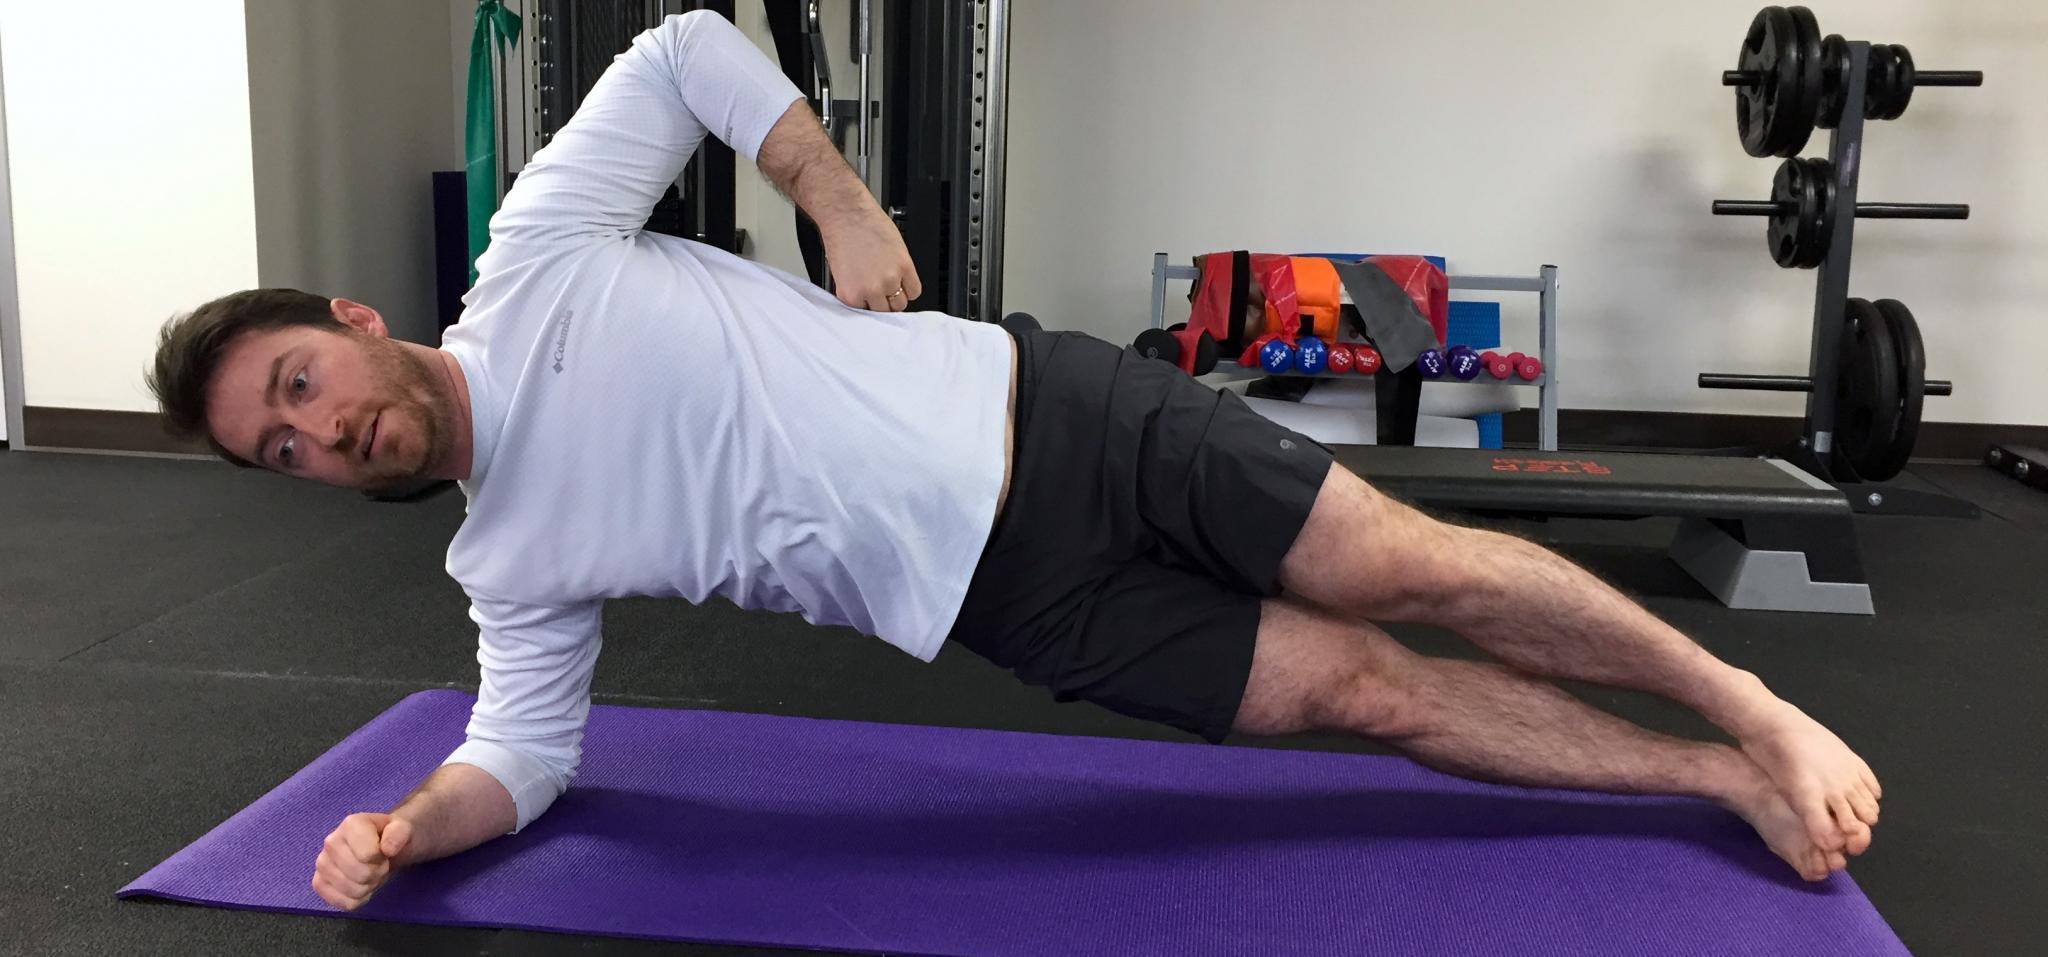 Holding a Plank, low back pain exercise